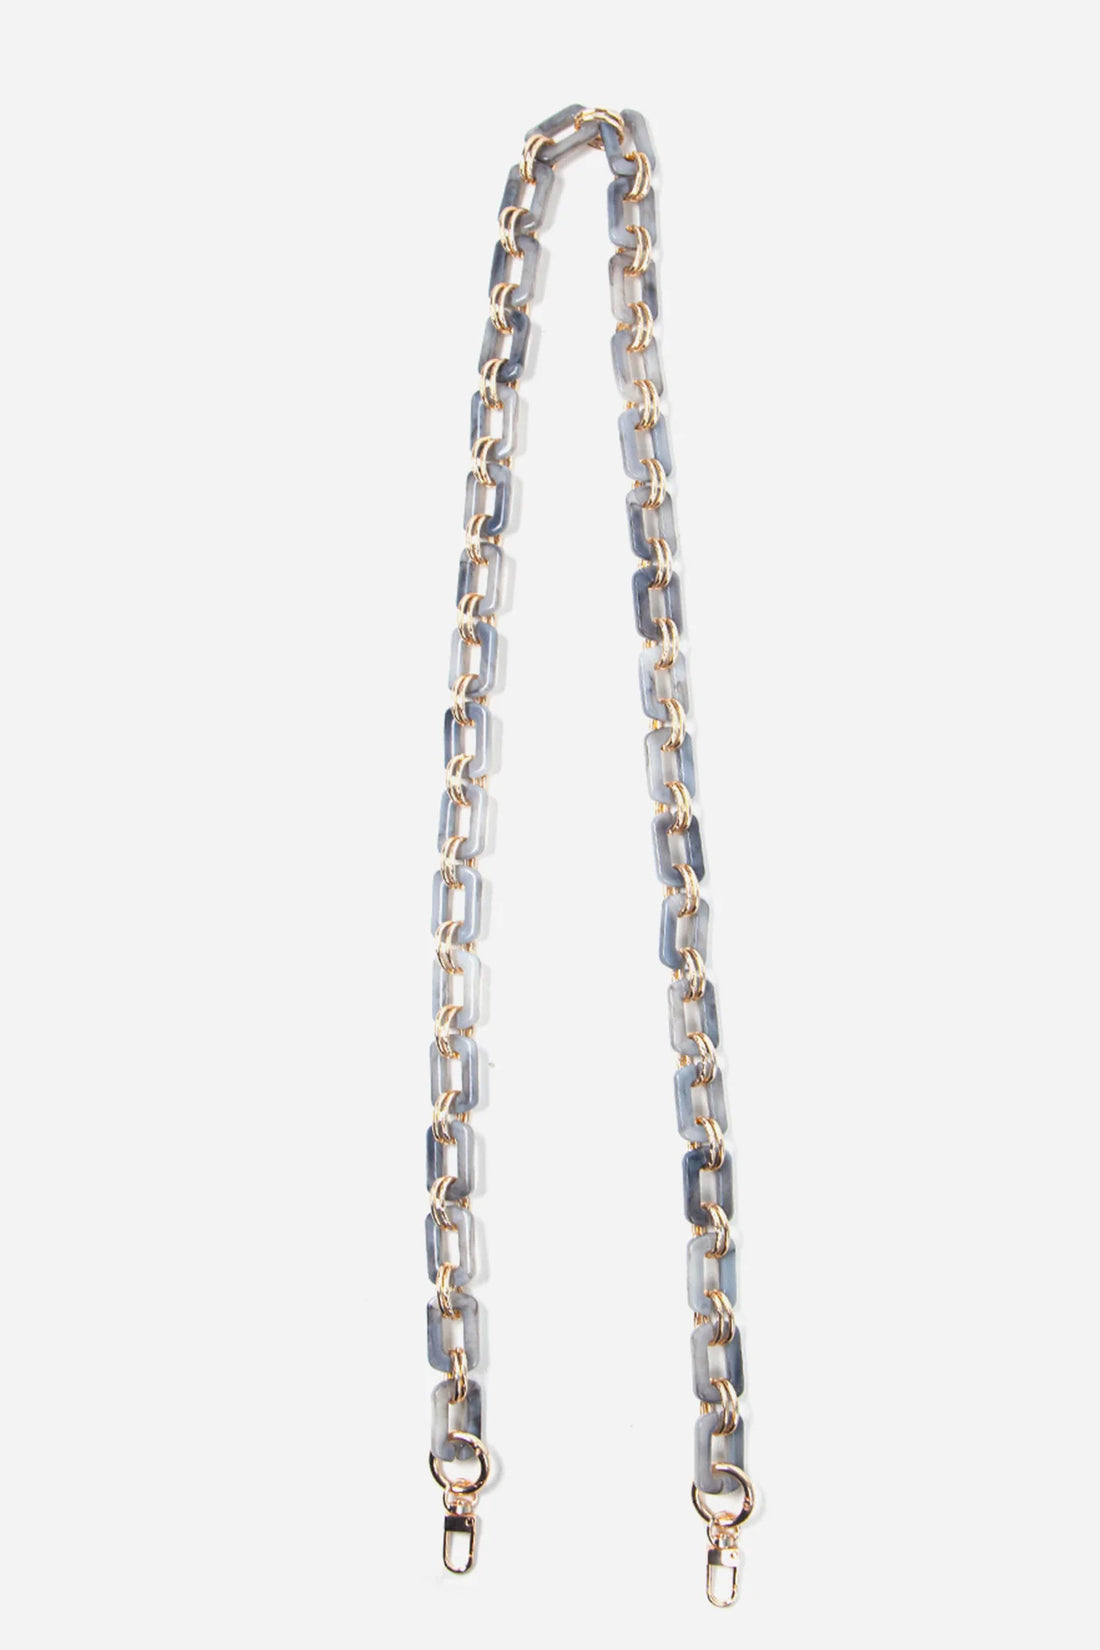 SQUARE LINK ACRYLIC BAG STRAP WITH ADDITIONAL GOLD LINKS | GREY